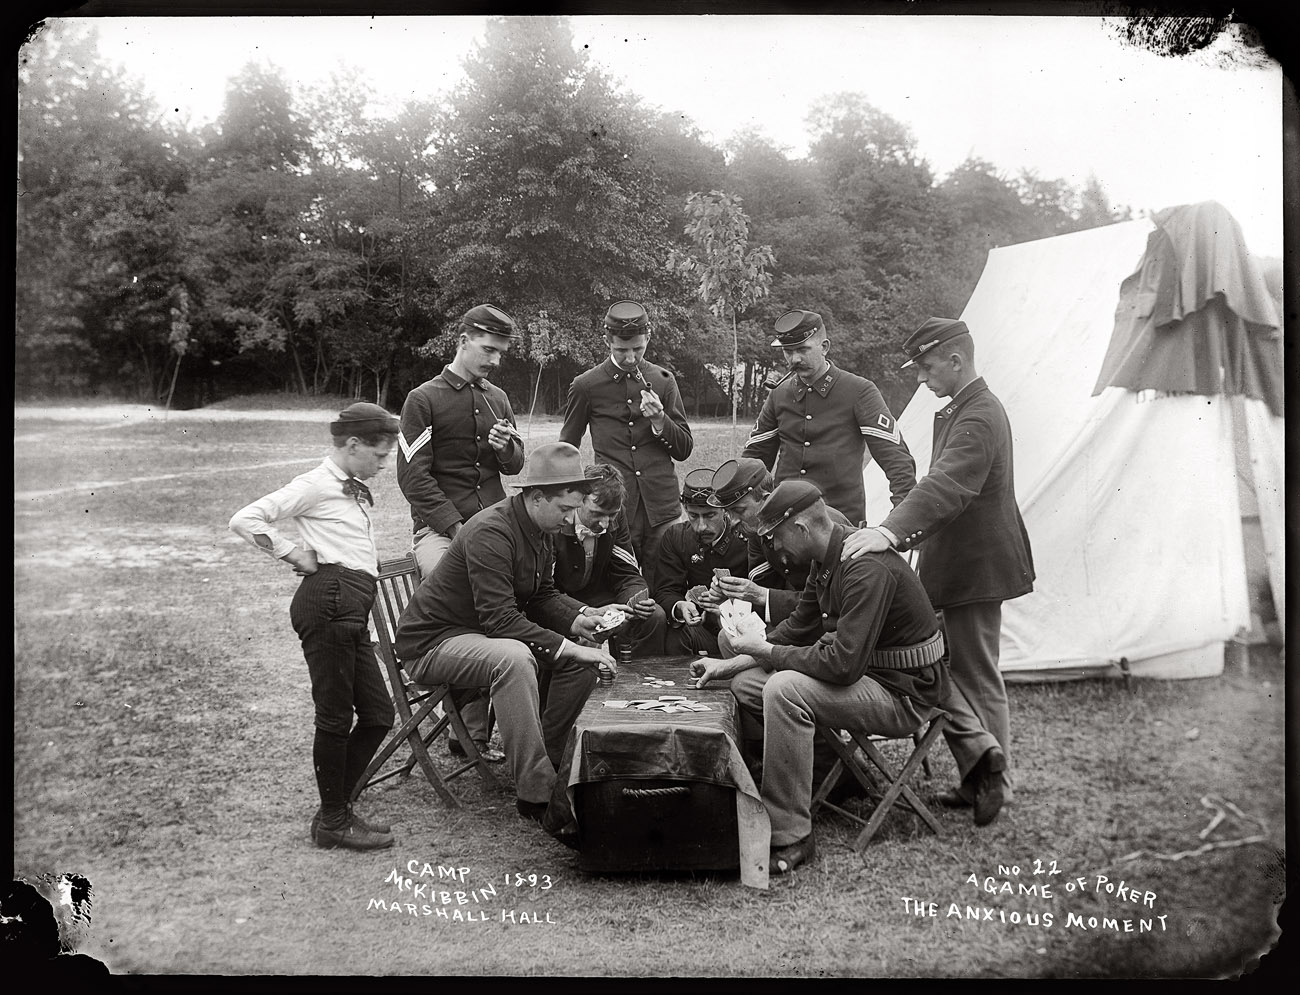 "The Anxious Moment." Poker game at Camp McKibbin, Marshall Hall, Maryland, 1893. With members of the 2nd, 3rd and 6th battalions of the District National Guard. View full size. Photograph by William Cruikshank.